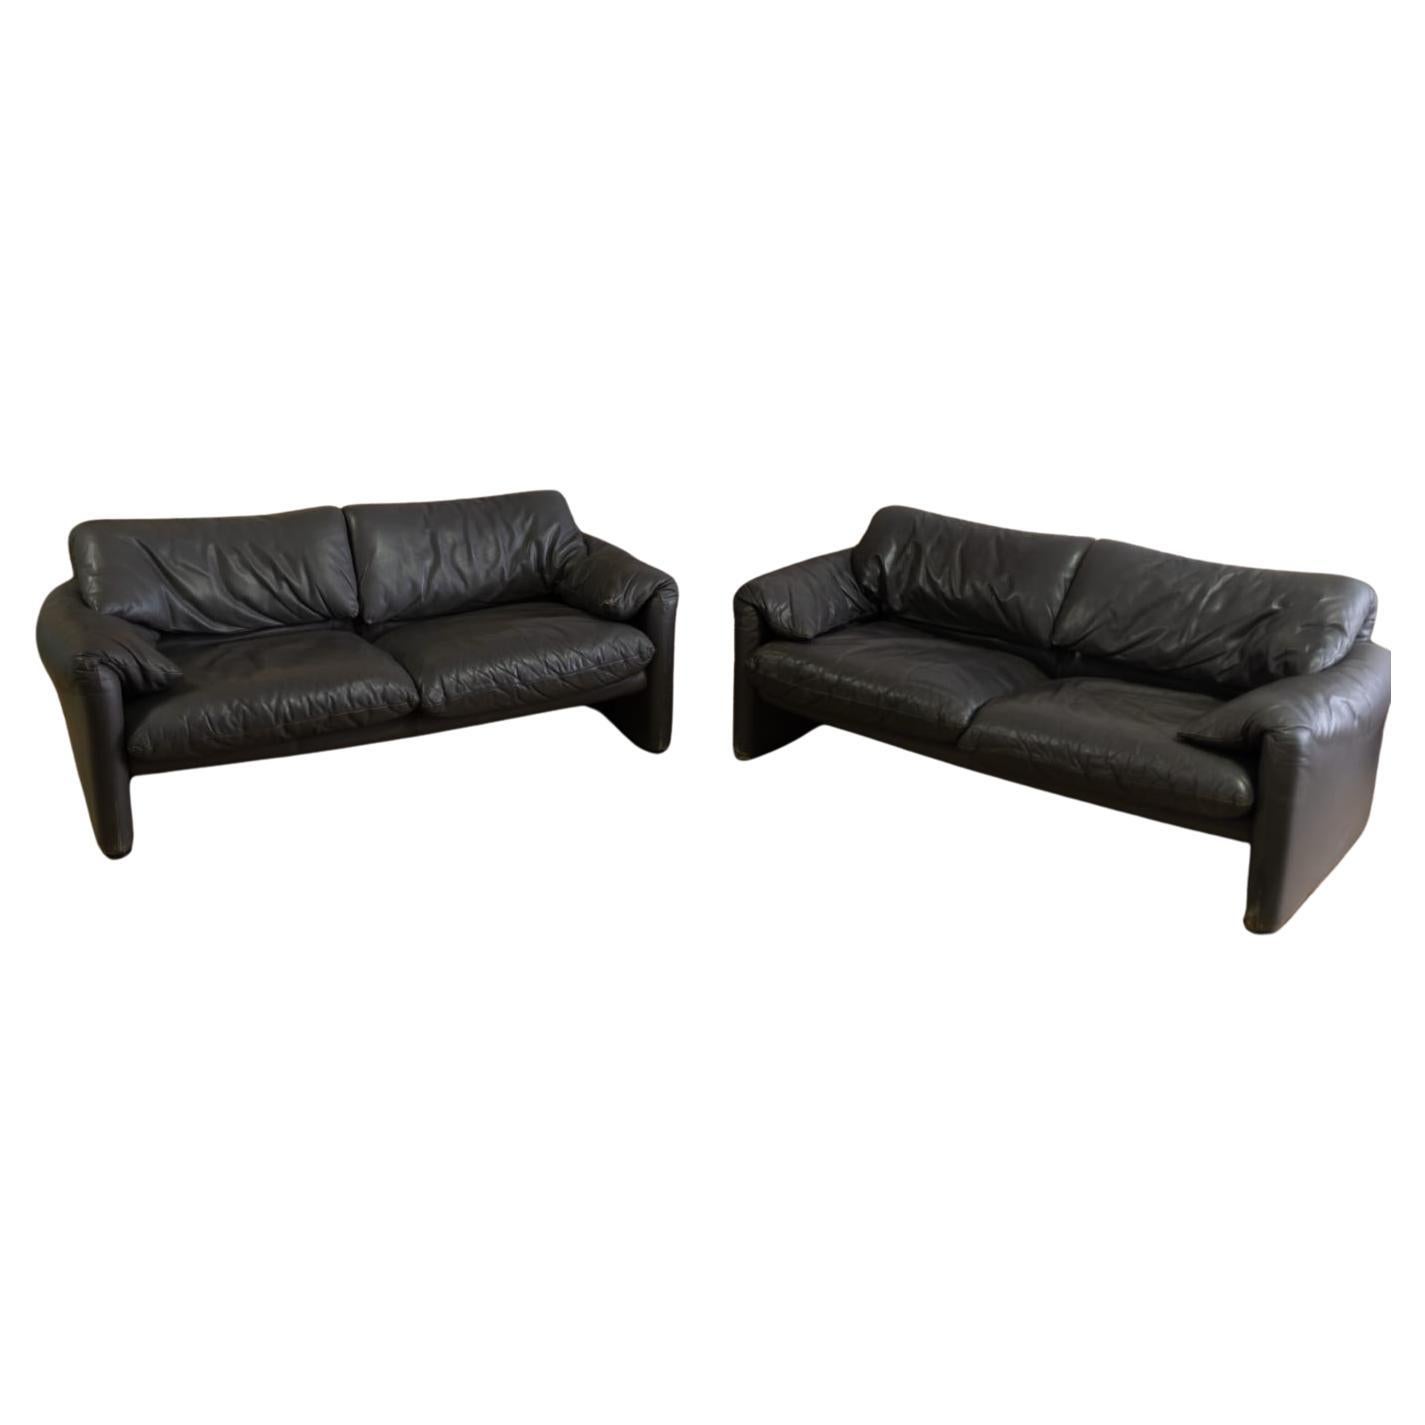 2 Maralunga sofas by Vico Magistretti Cassina production Black leather two-seater For Sale